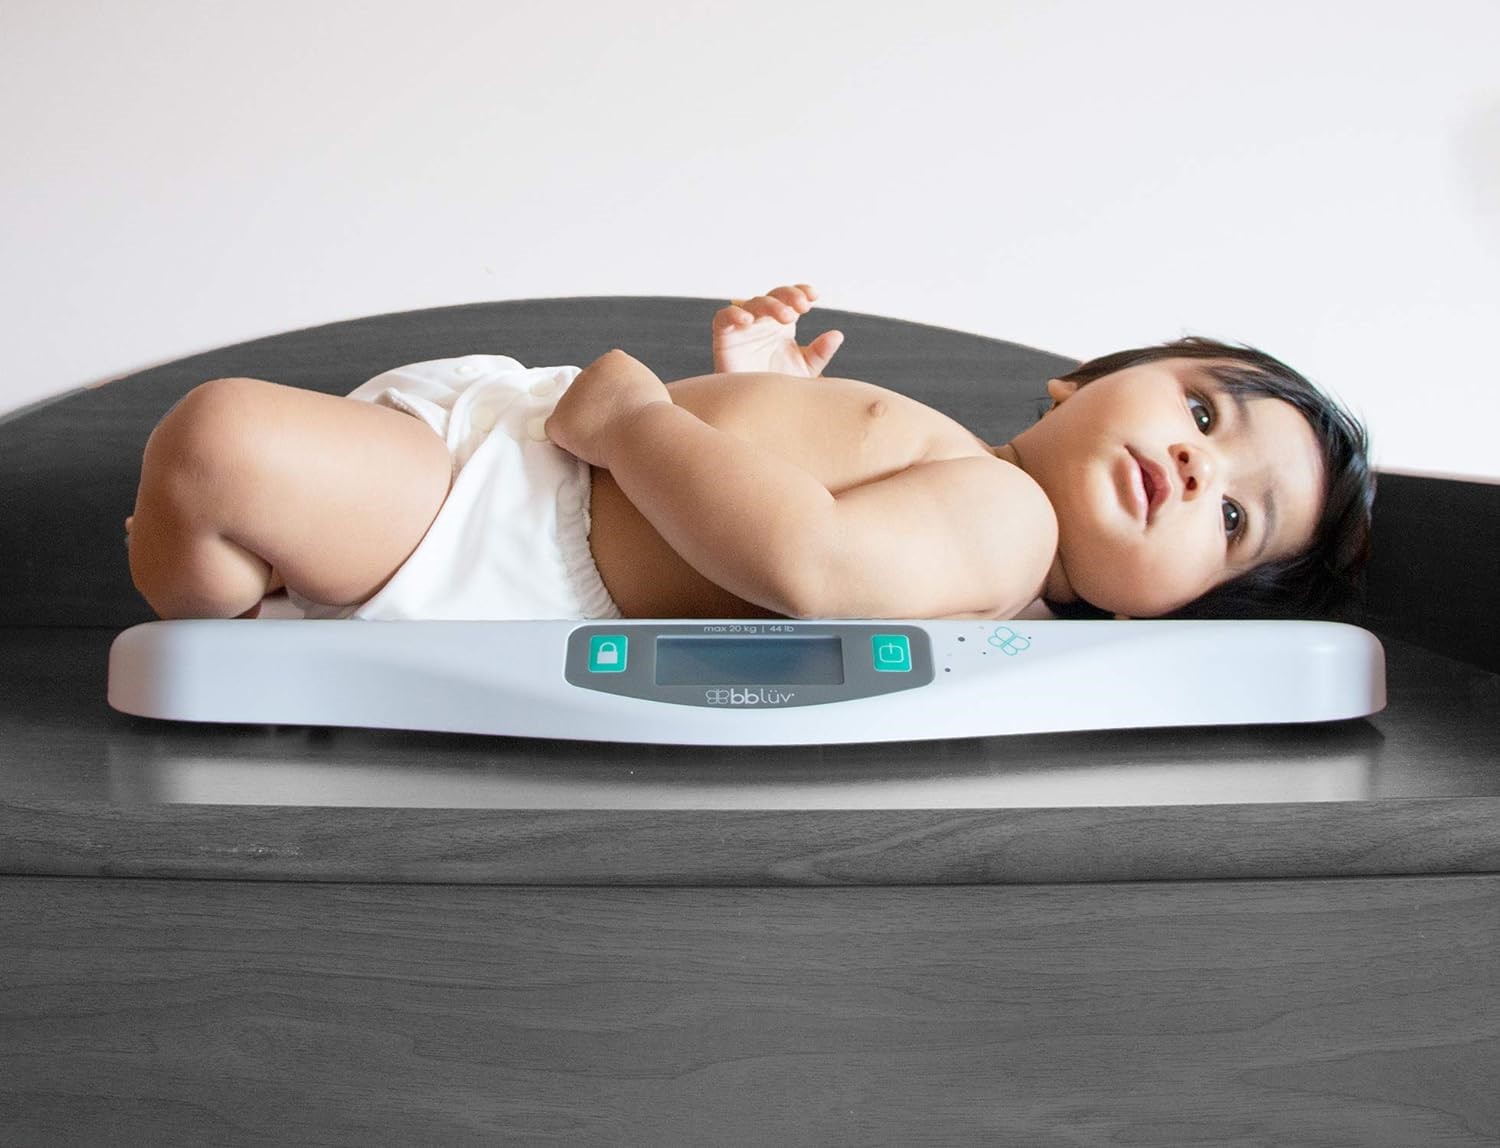 Digital Baby Scale Review: Accurate and Reliable